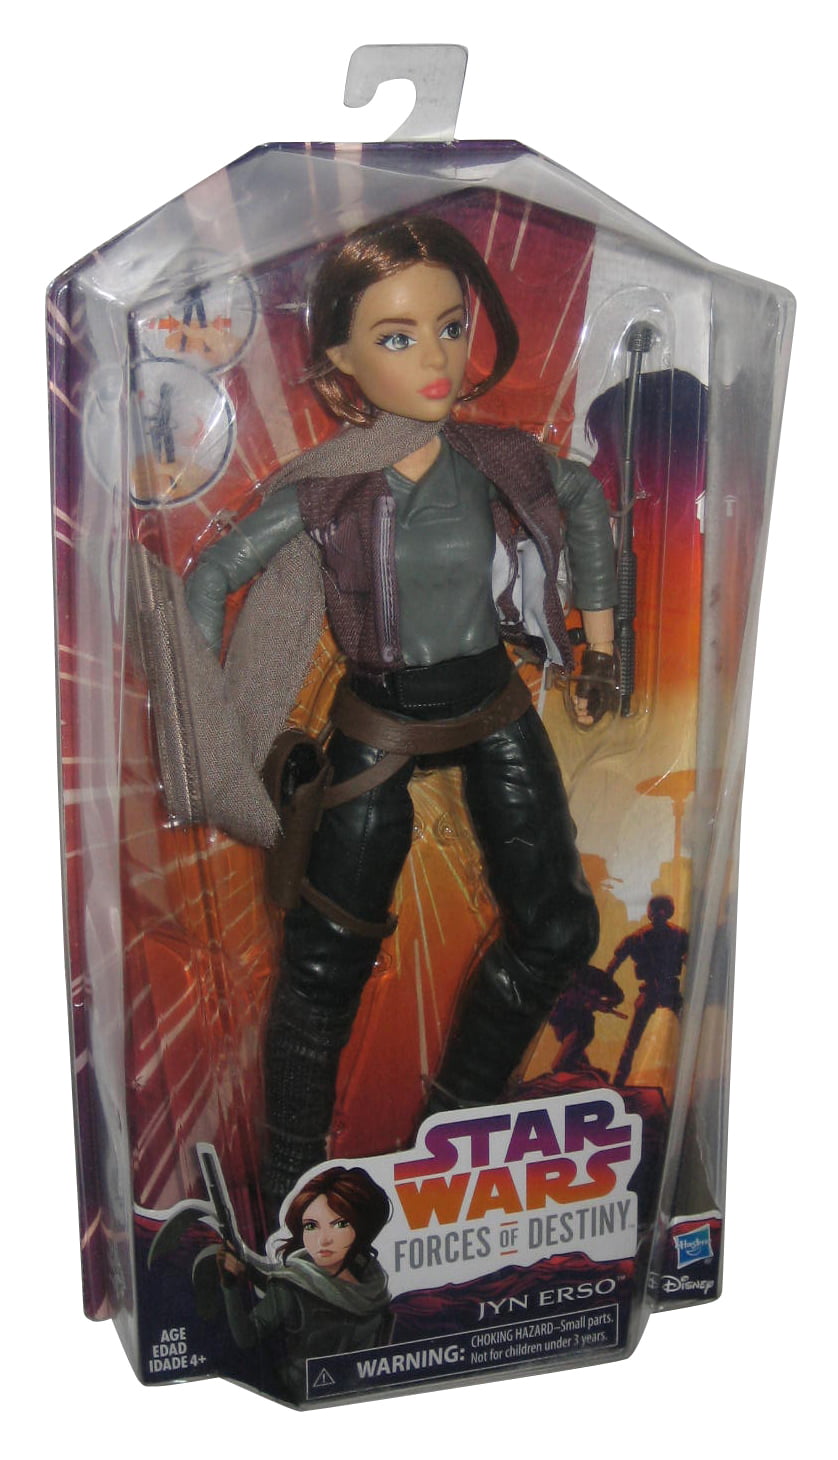 Star Wars Forces of Destiny Jyn Erso Doll Adventure Figure Poseable Toy 11” NEW